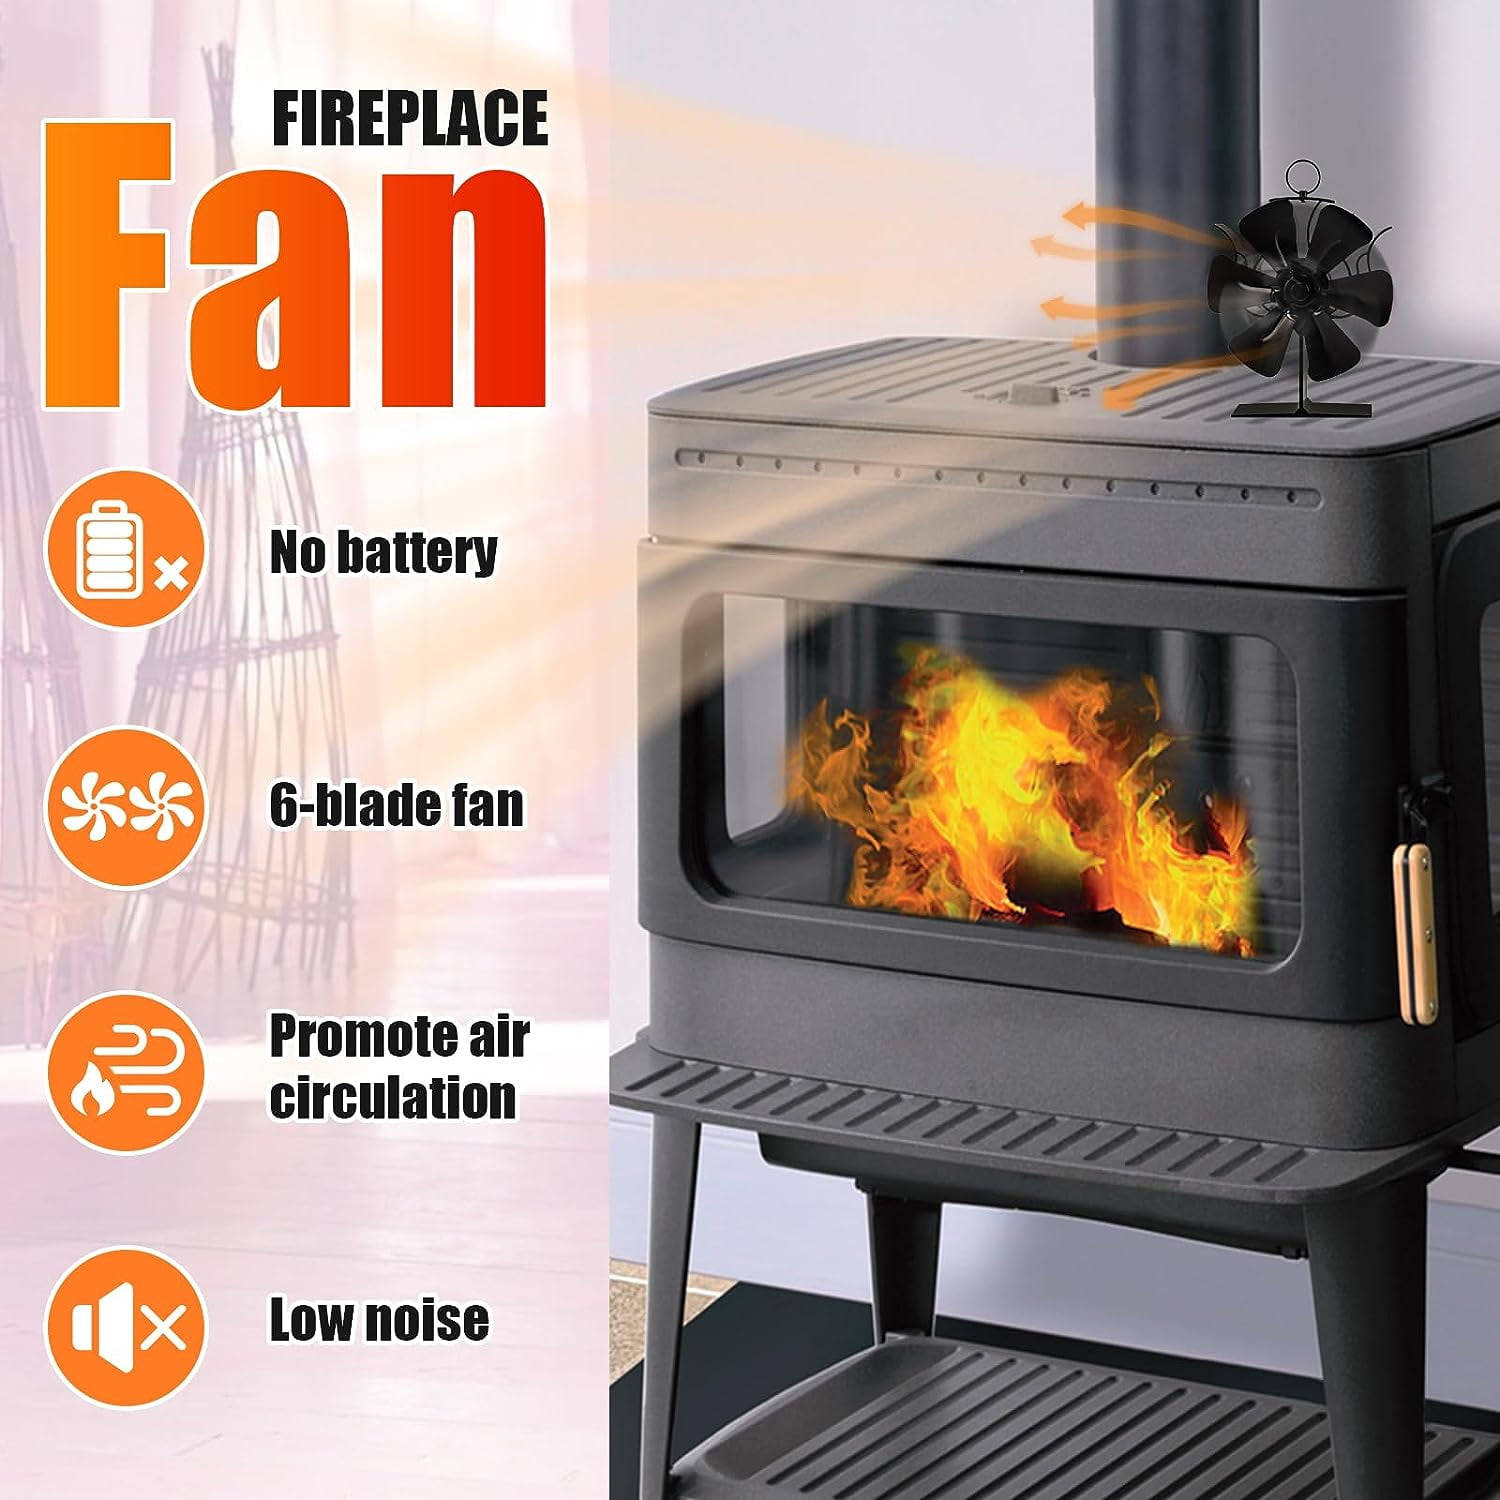 Steelhead Stirling Engine Stove Fan: Must Have Accessory – Forestry Reviews